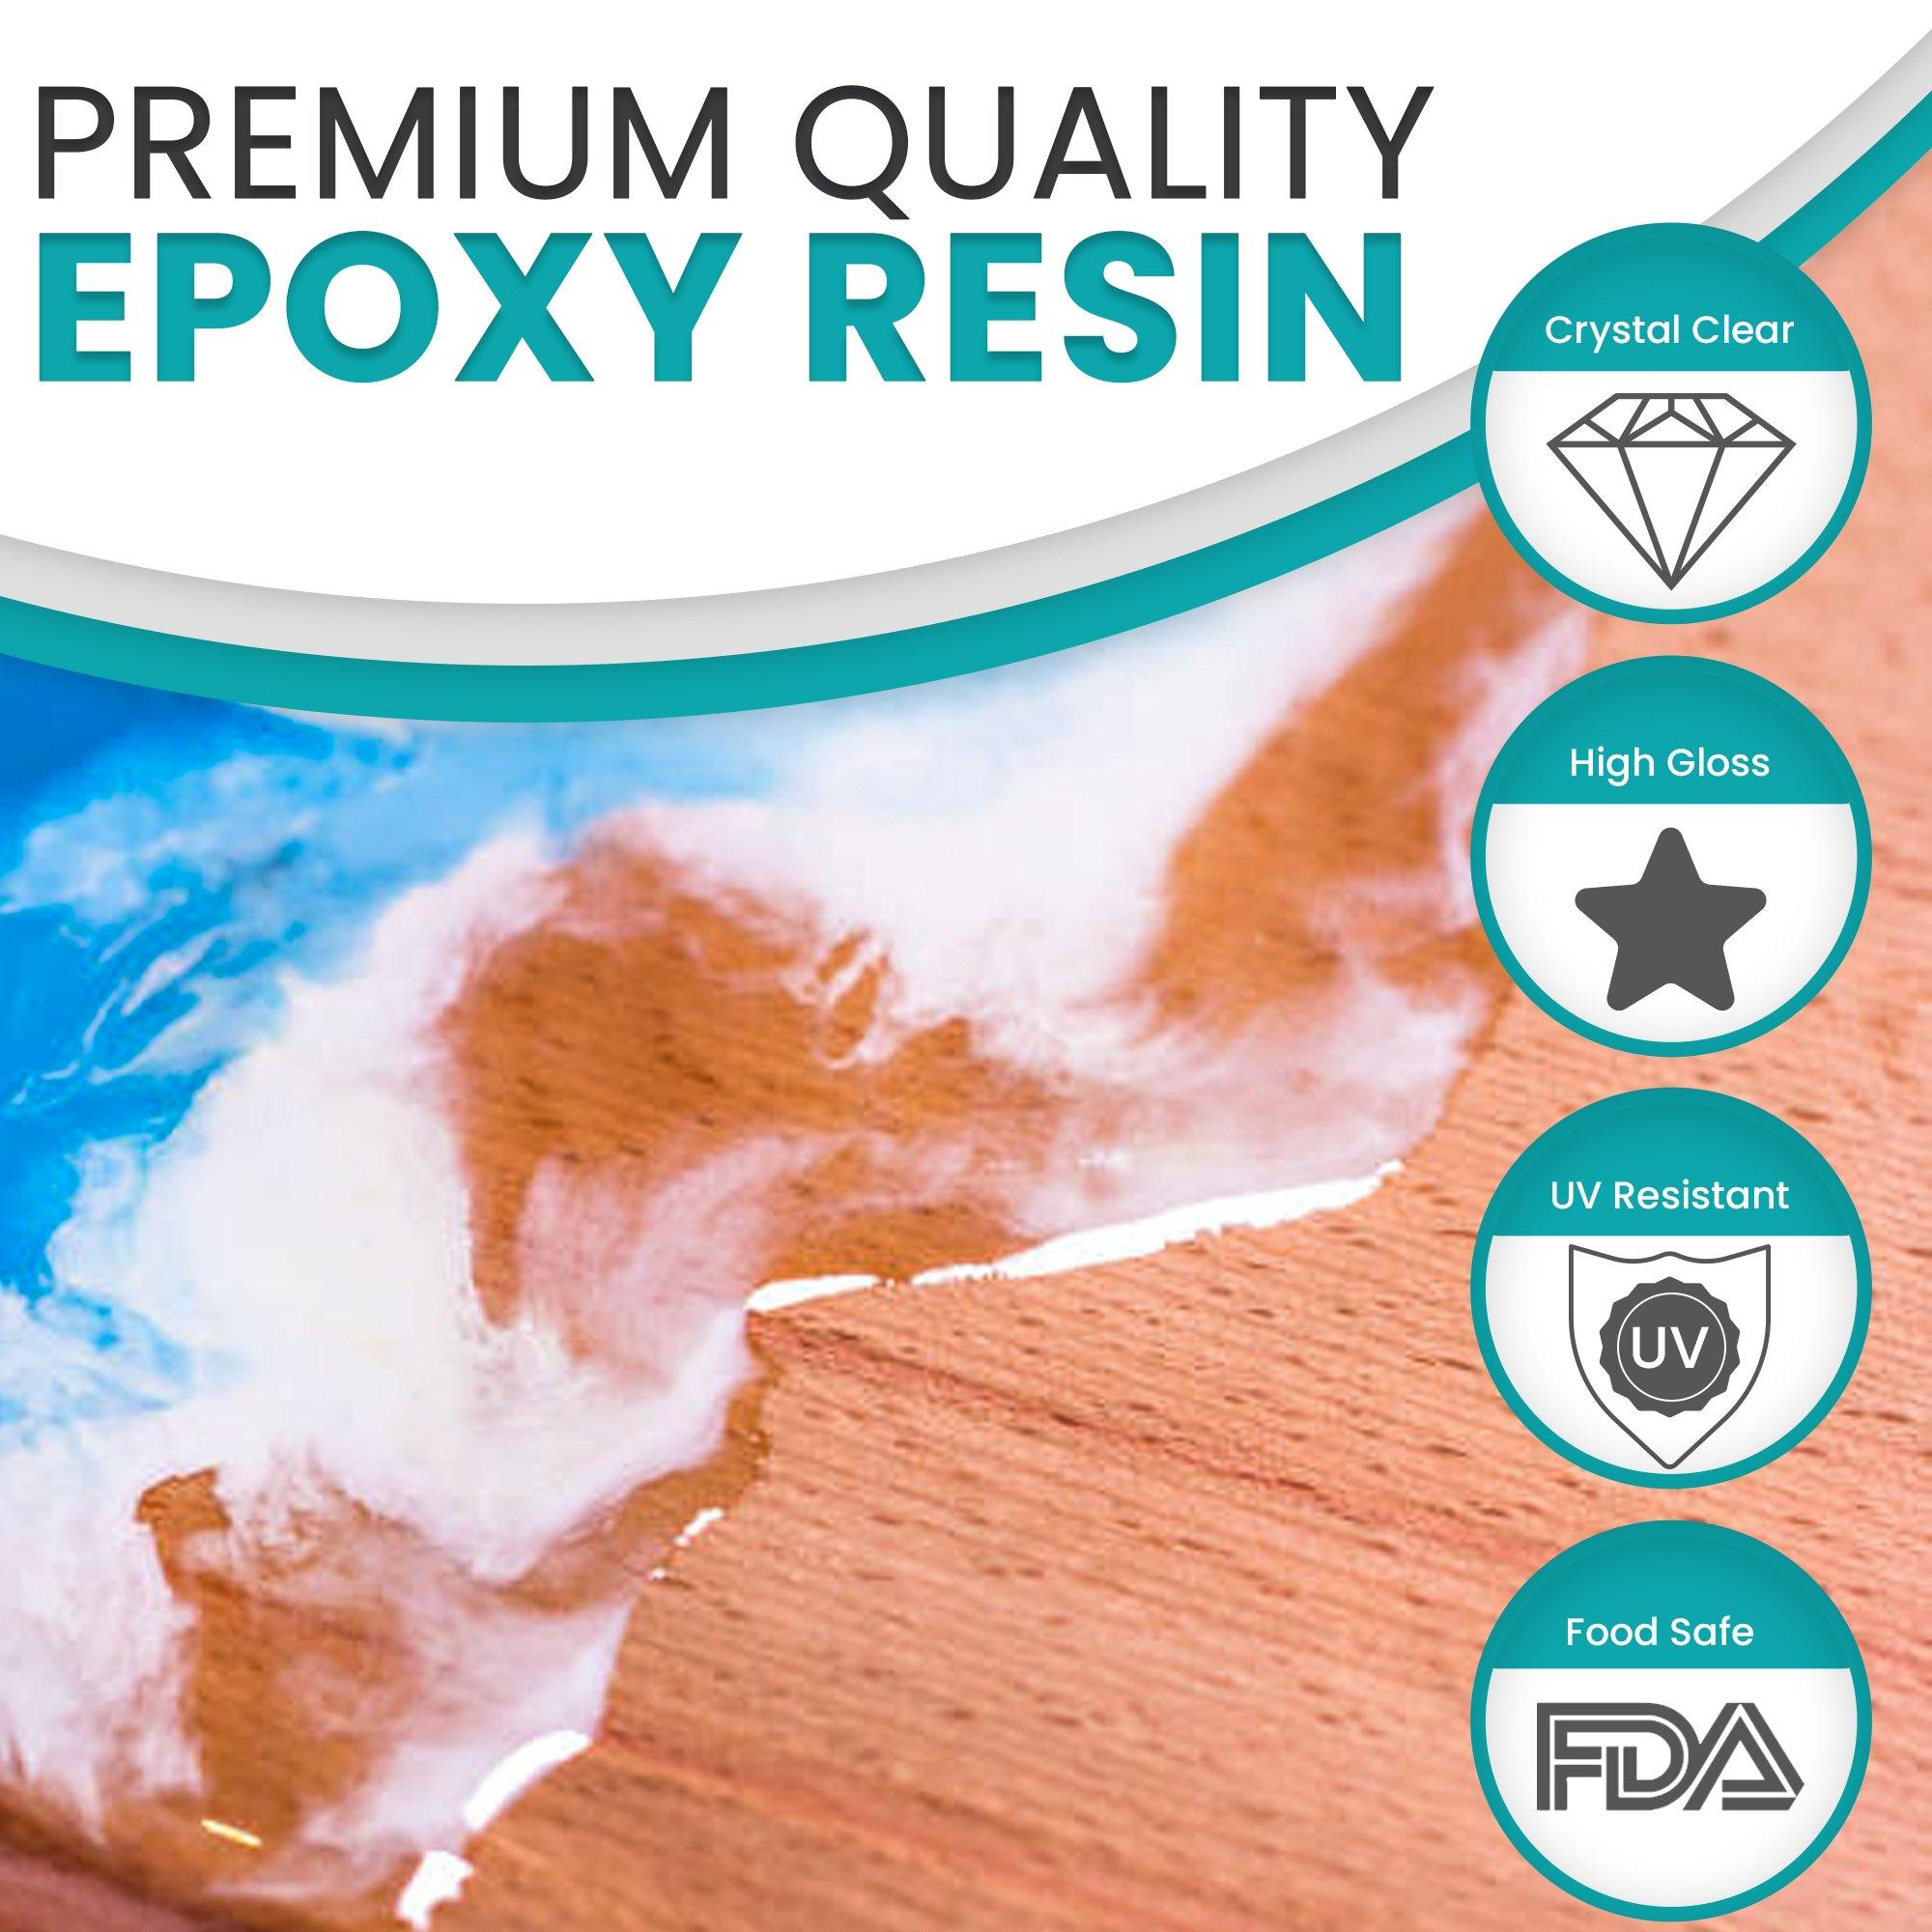 Specialty Resin & Chemical Epox-It 80 (1 Gal), Clear Epoxy Resin Kit for  Beginners & Experts, Clear Epoxy Coating for Bar Top, Countertop, Tabletop